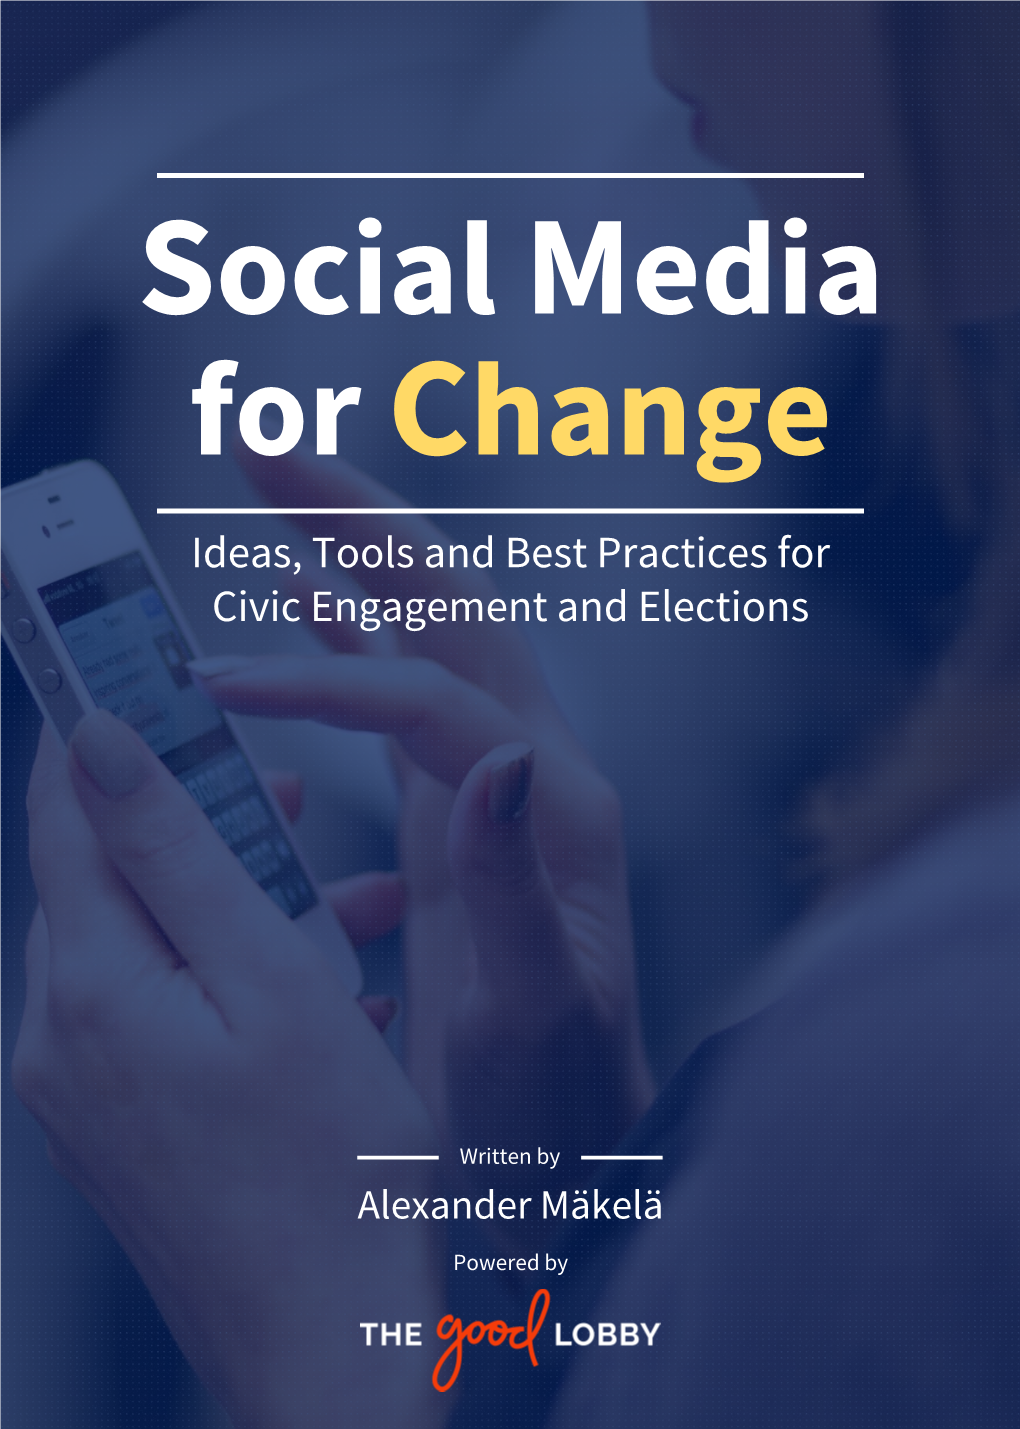 Social Media for Change Ideas, Tools and Best Practices for Civic Engagement and Elections